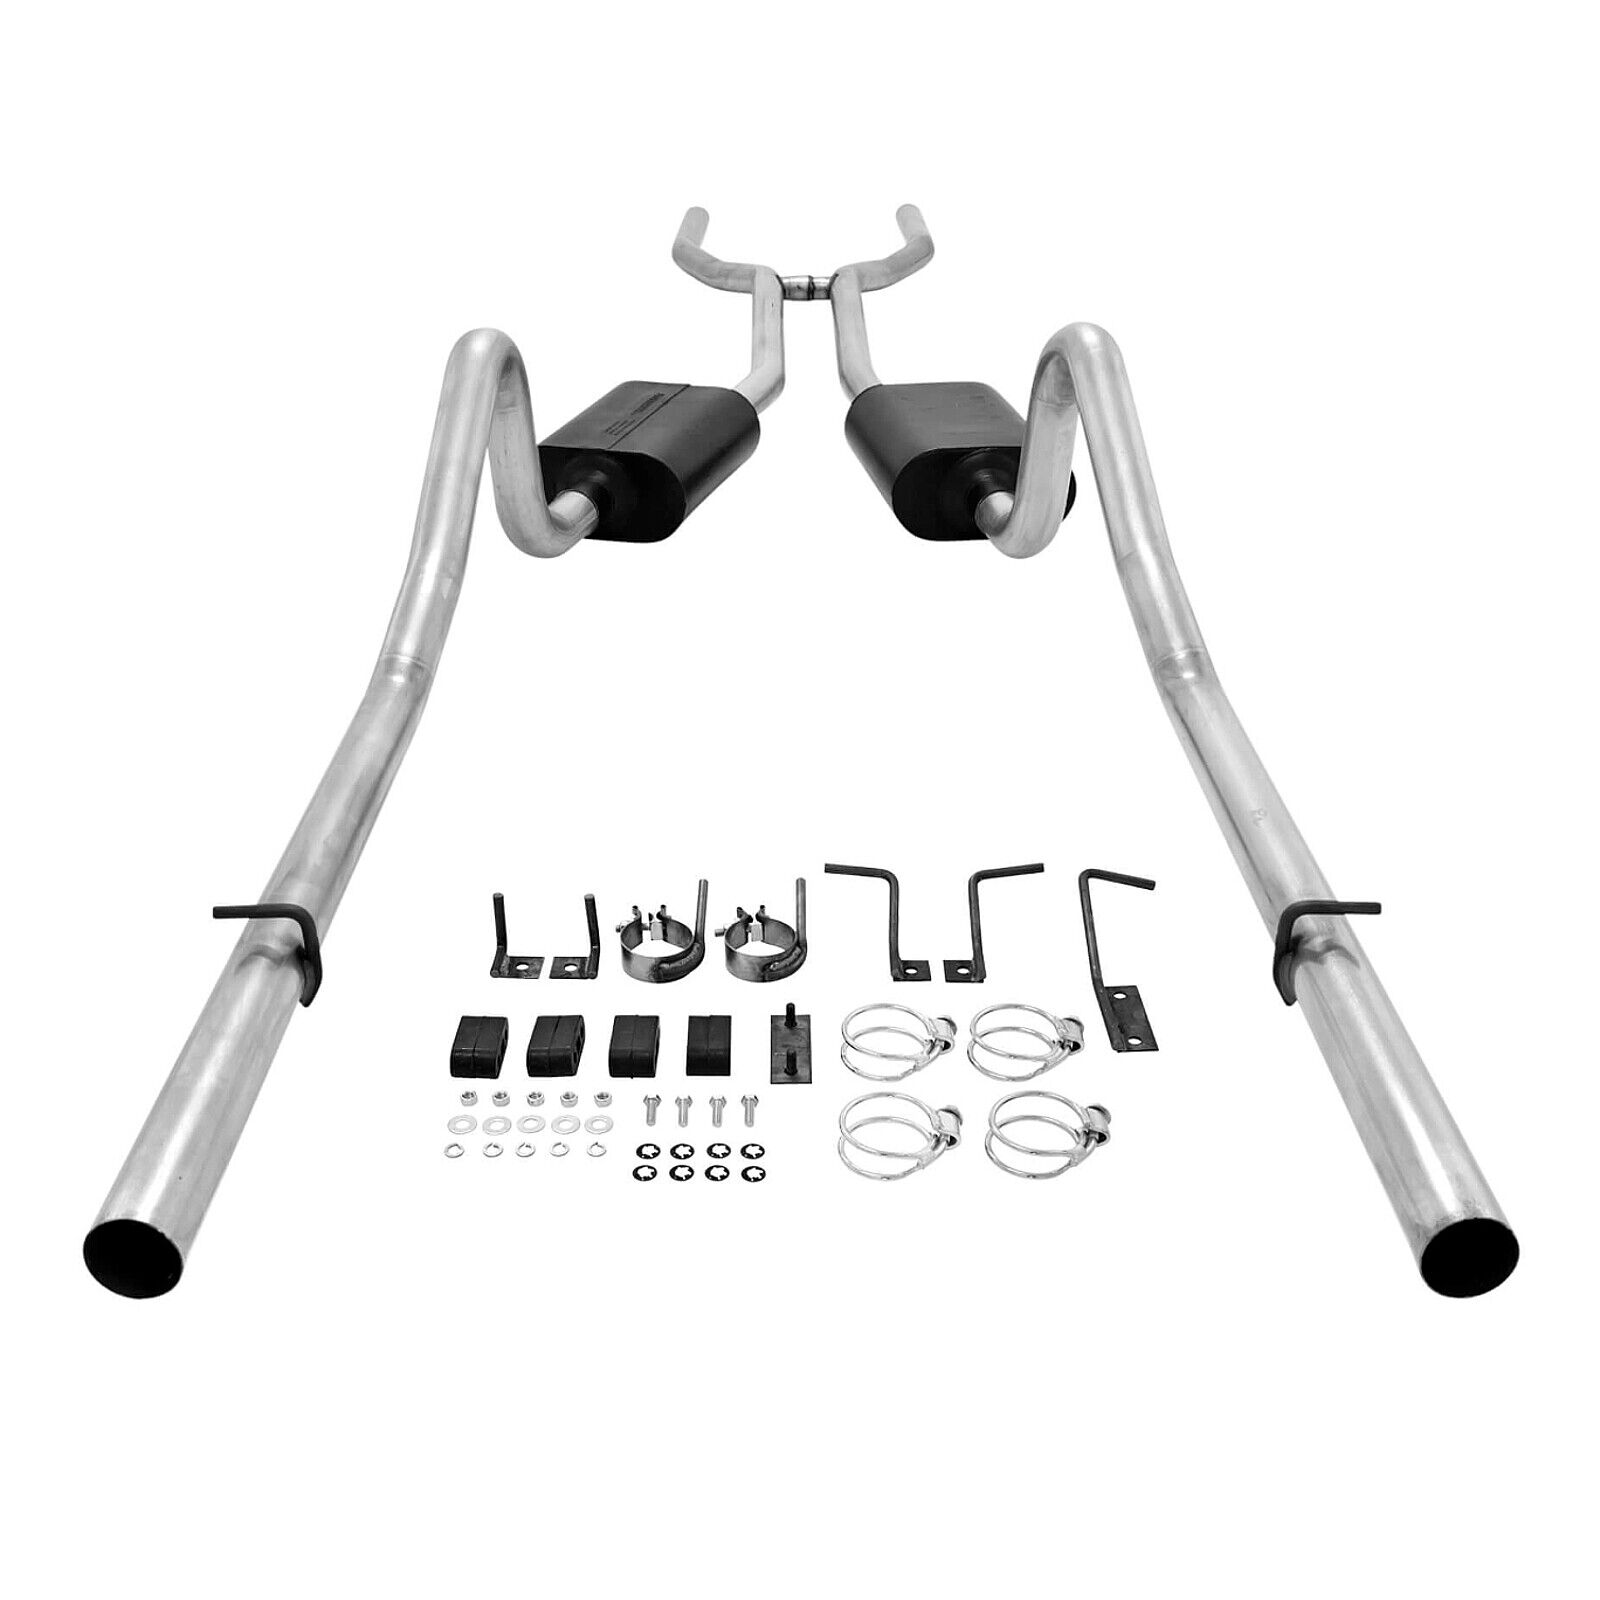 Flowmaster American Thunder Exhaust System for 68-70 Charger Coronet Road Runner